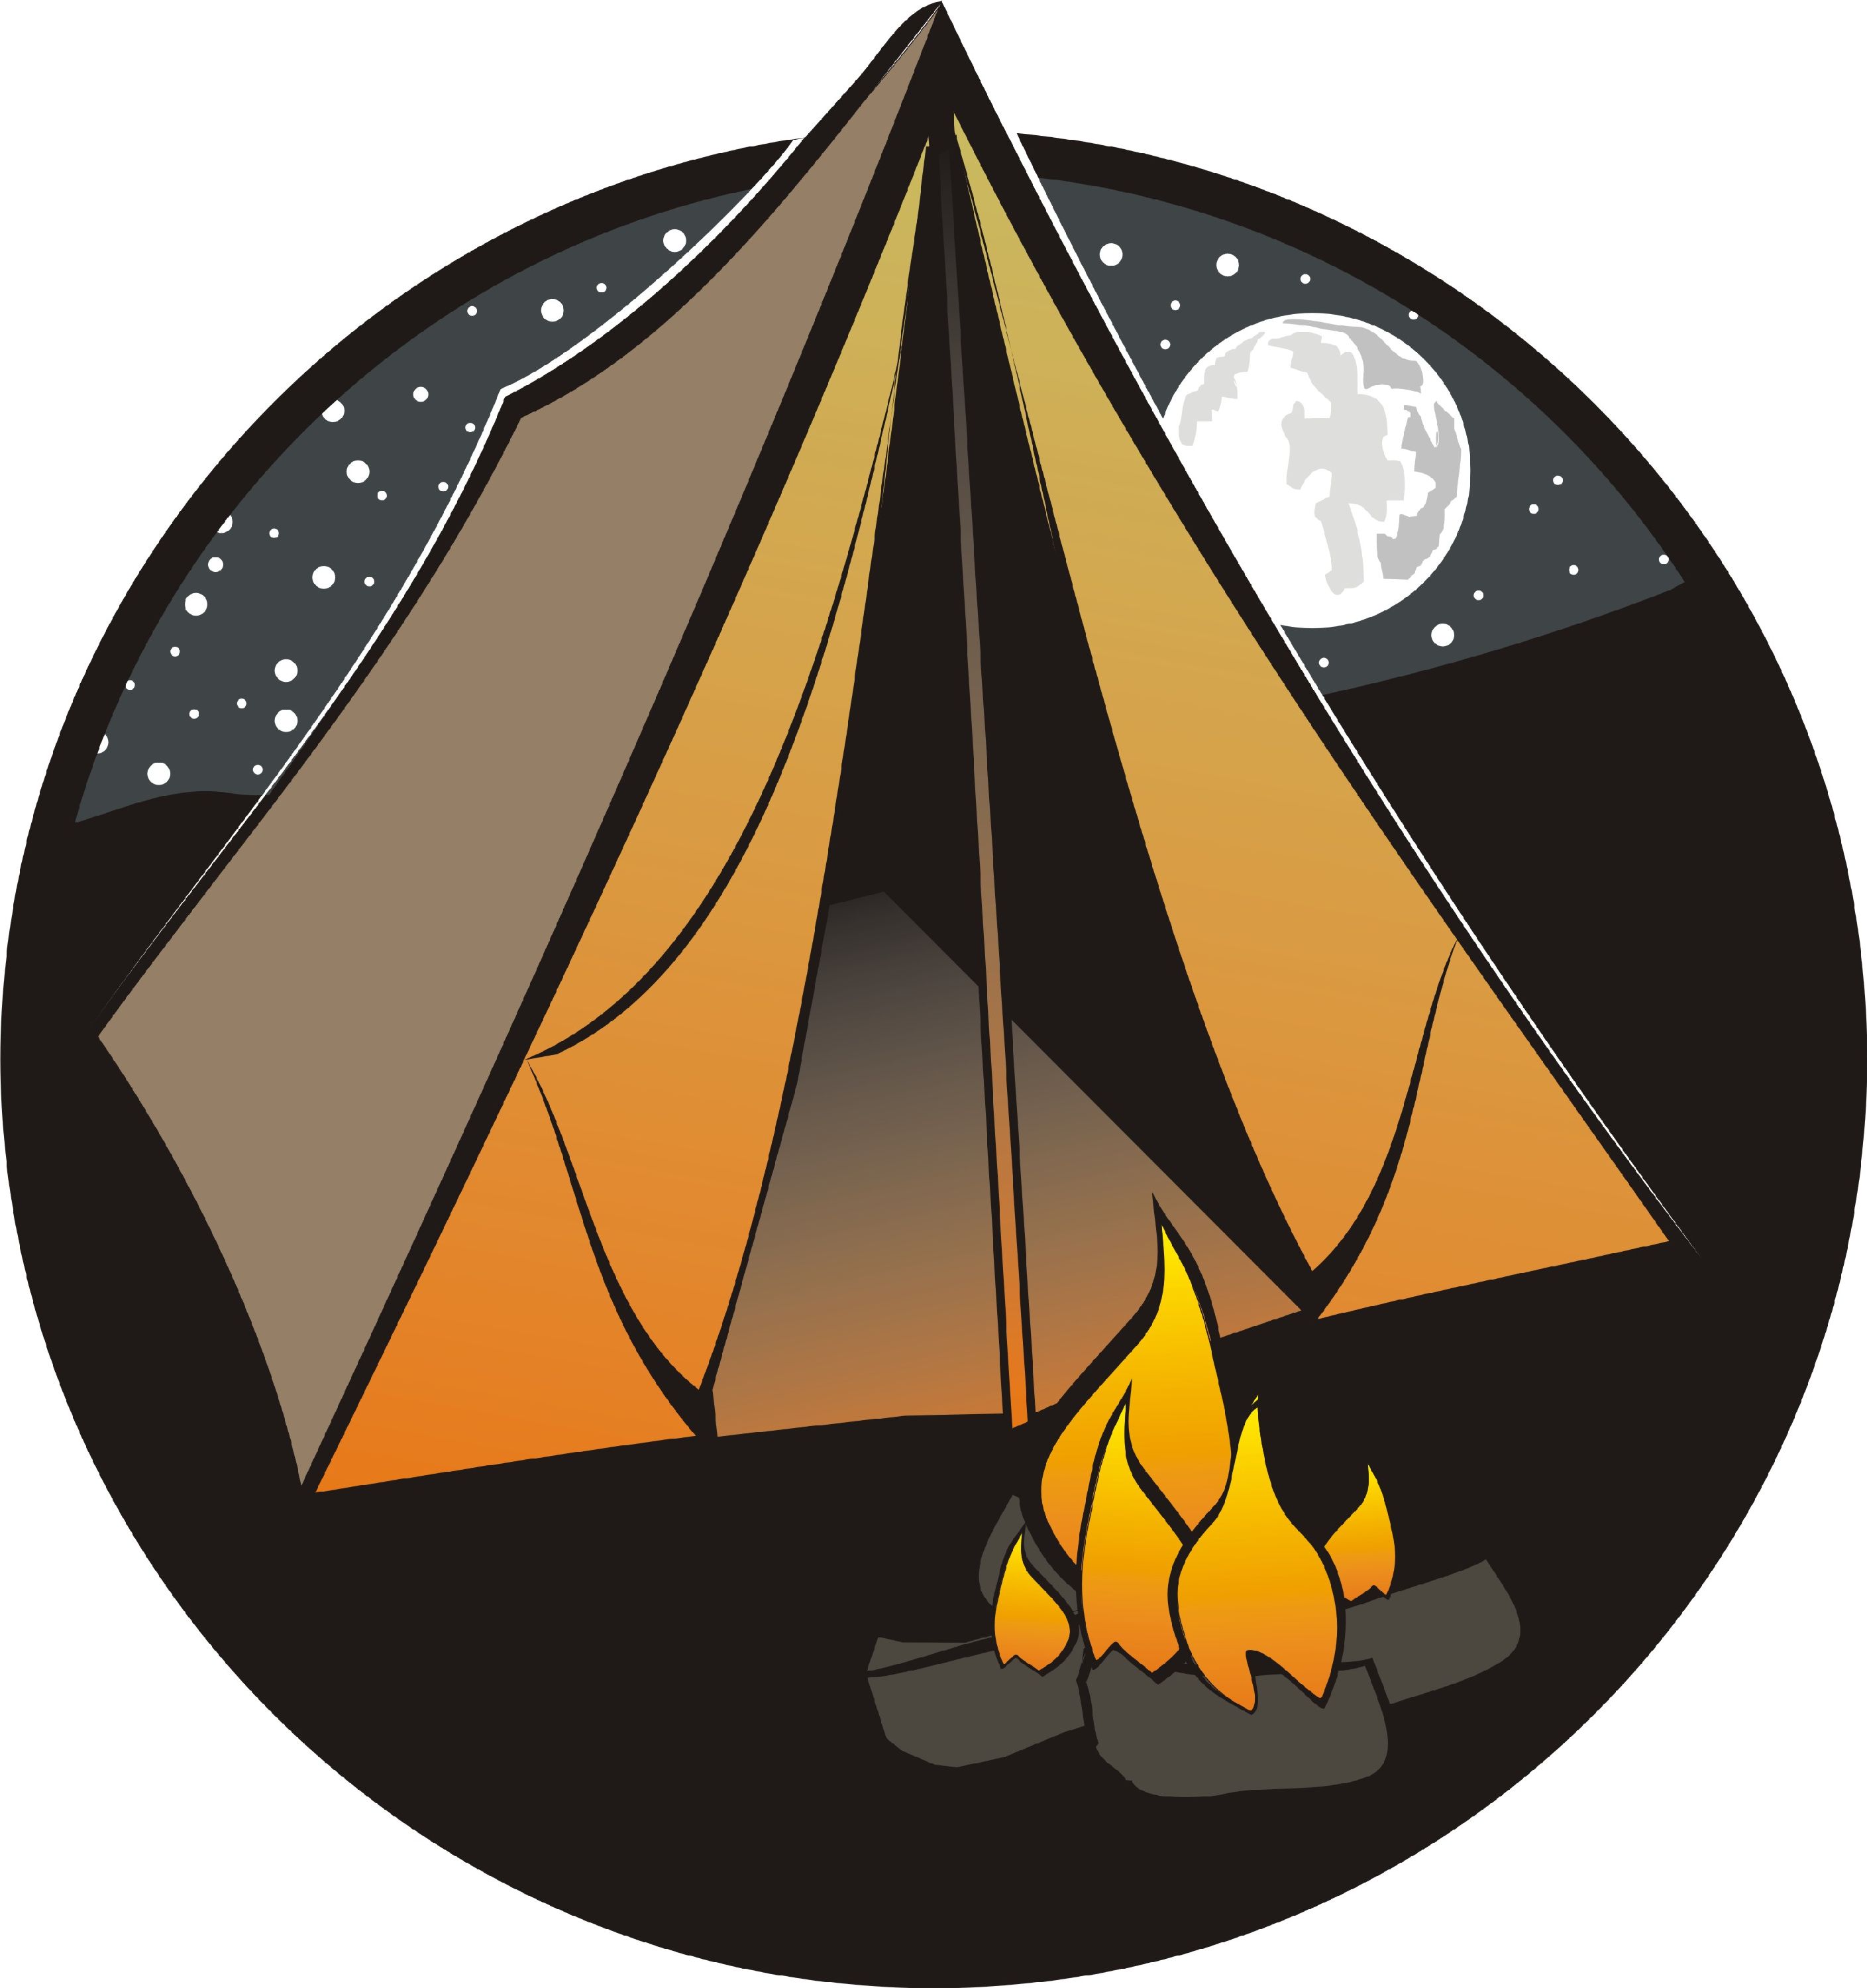 free clipart images camping - photo #26